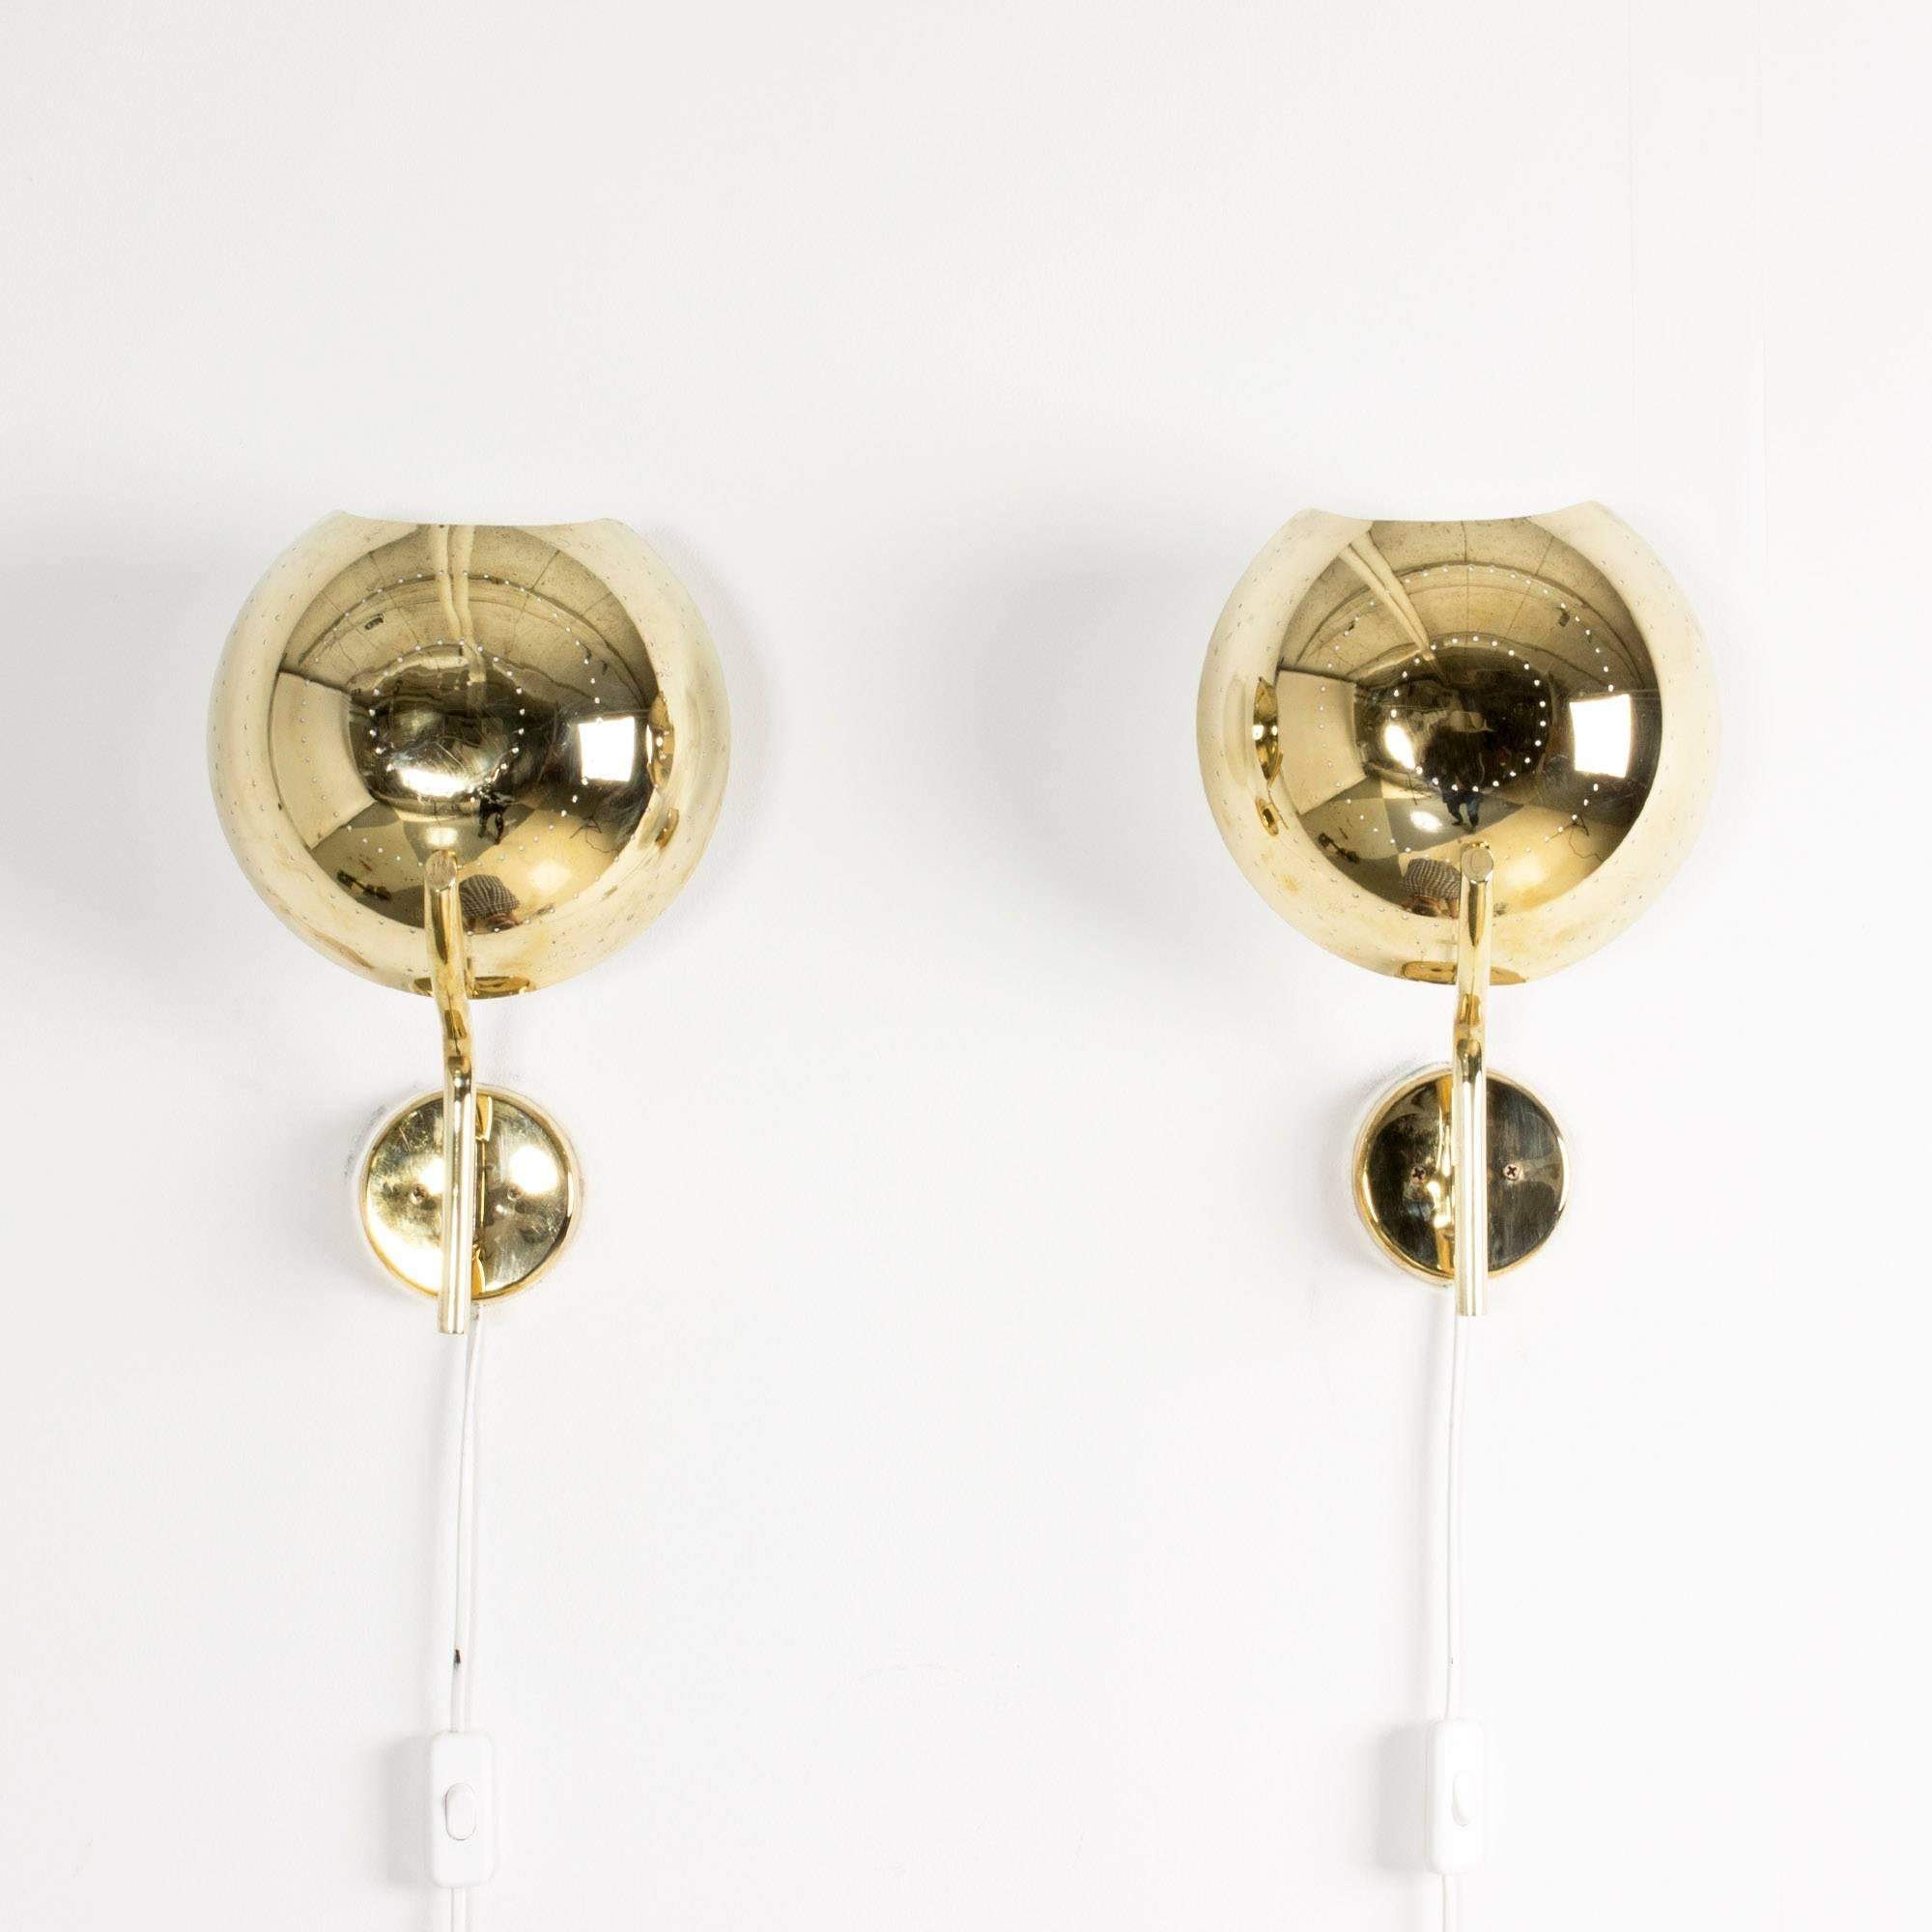 Pair of round Finnish brass wall sconces with a circular pattern of perforated holes. The tops of the sconces are slightly concave.